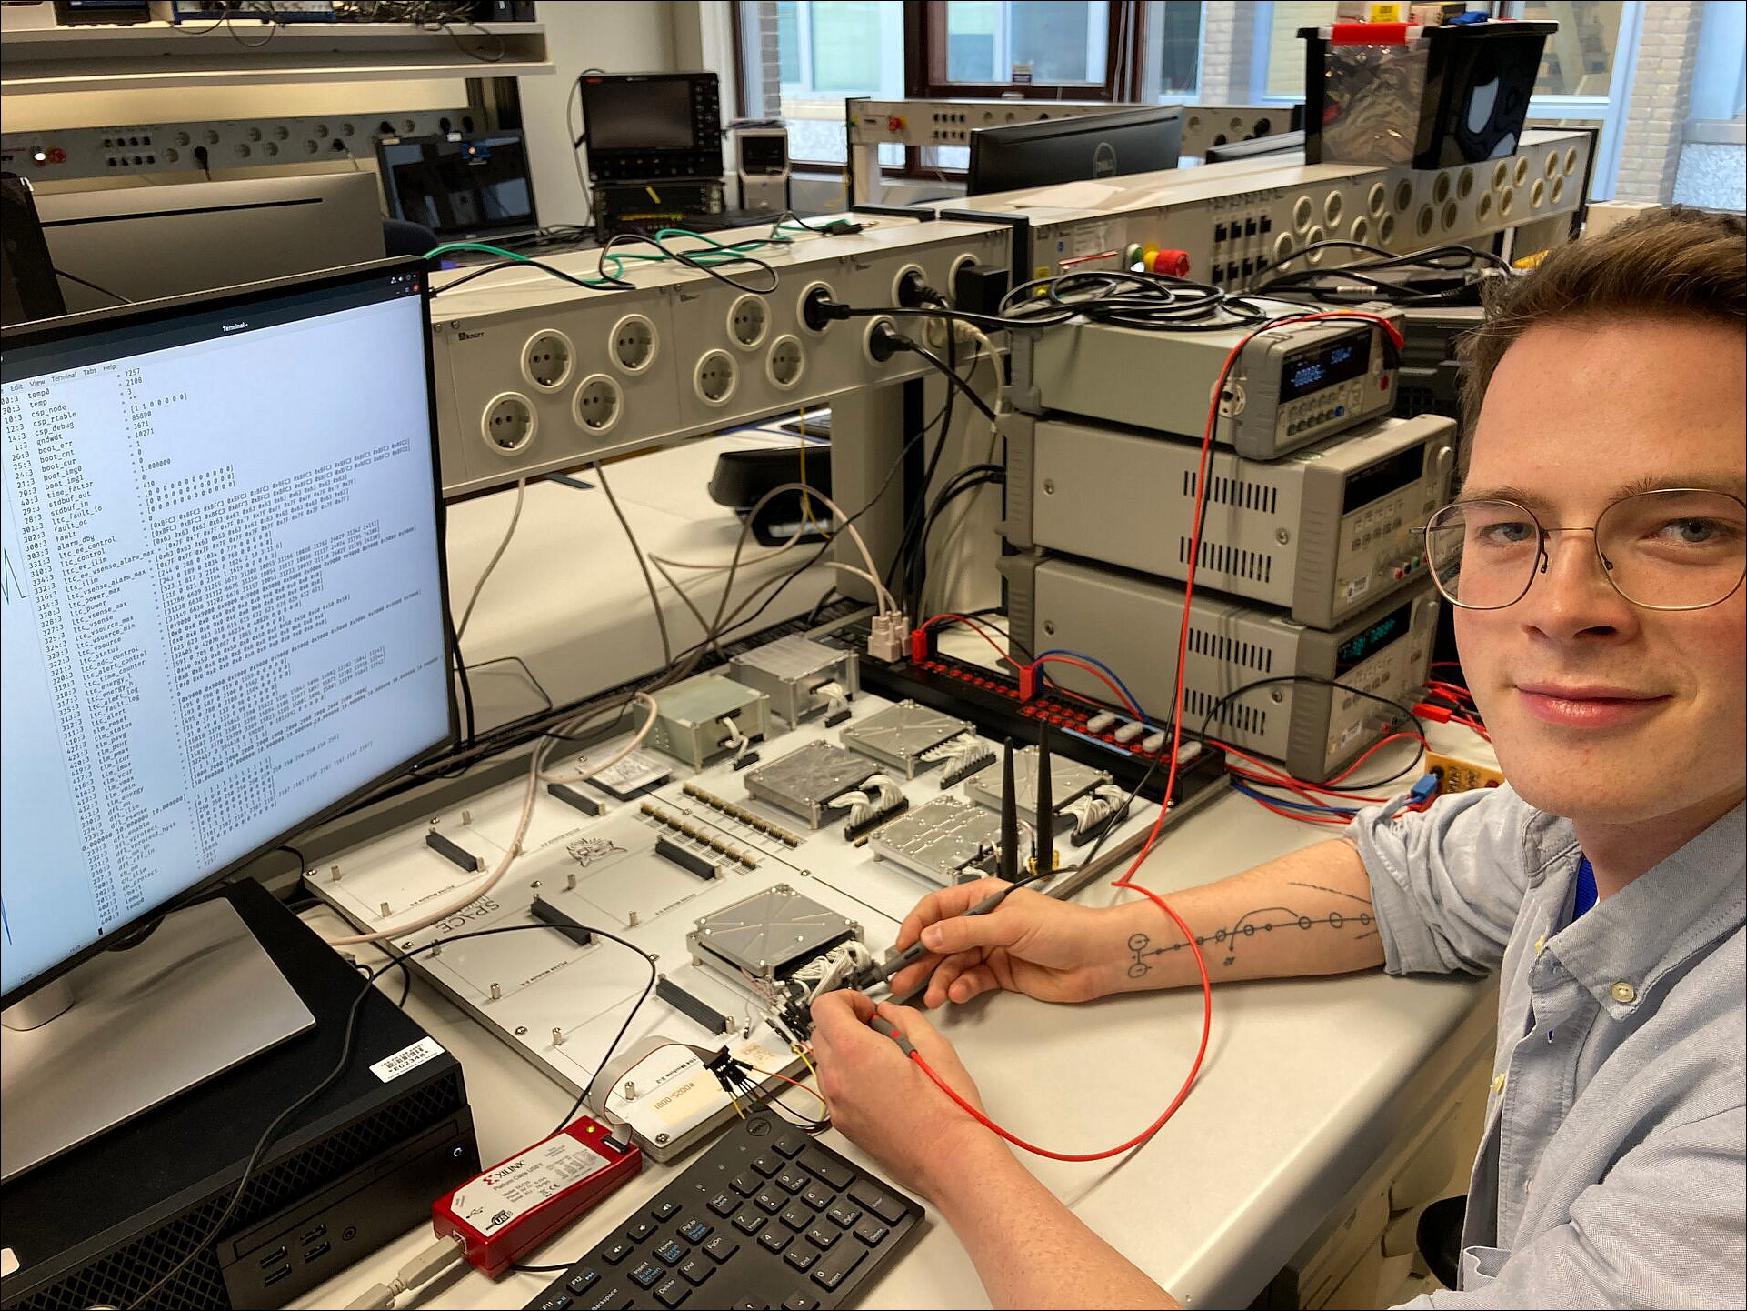 Figure 2: ESA Young Graduate Trainee Malte Bargholz with the FlatSat he has been working on a resource for testing CubeSat elements as part of his work with the On-Board Computer and Data Handling section at ESTEC in the Netherlands (image credit: ESA)